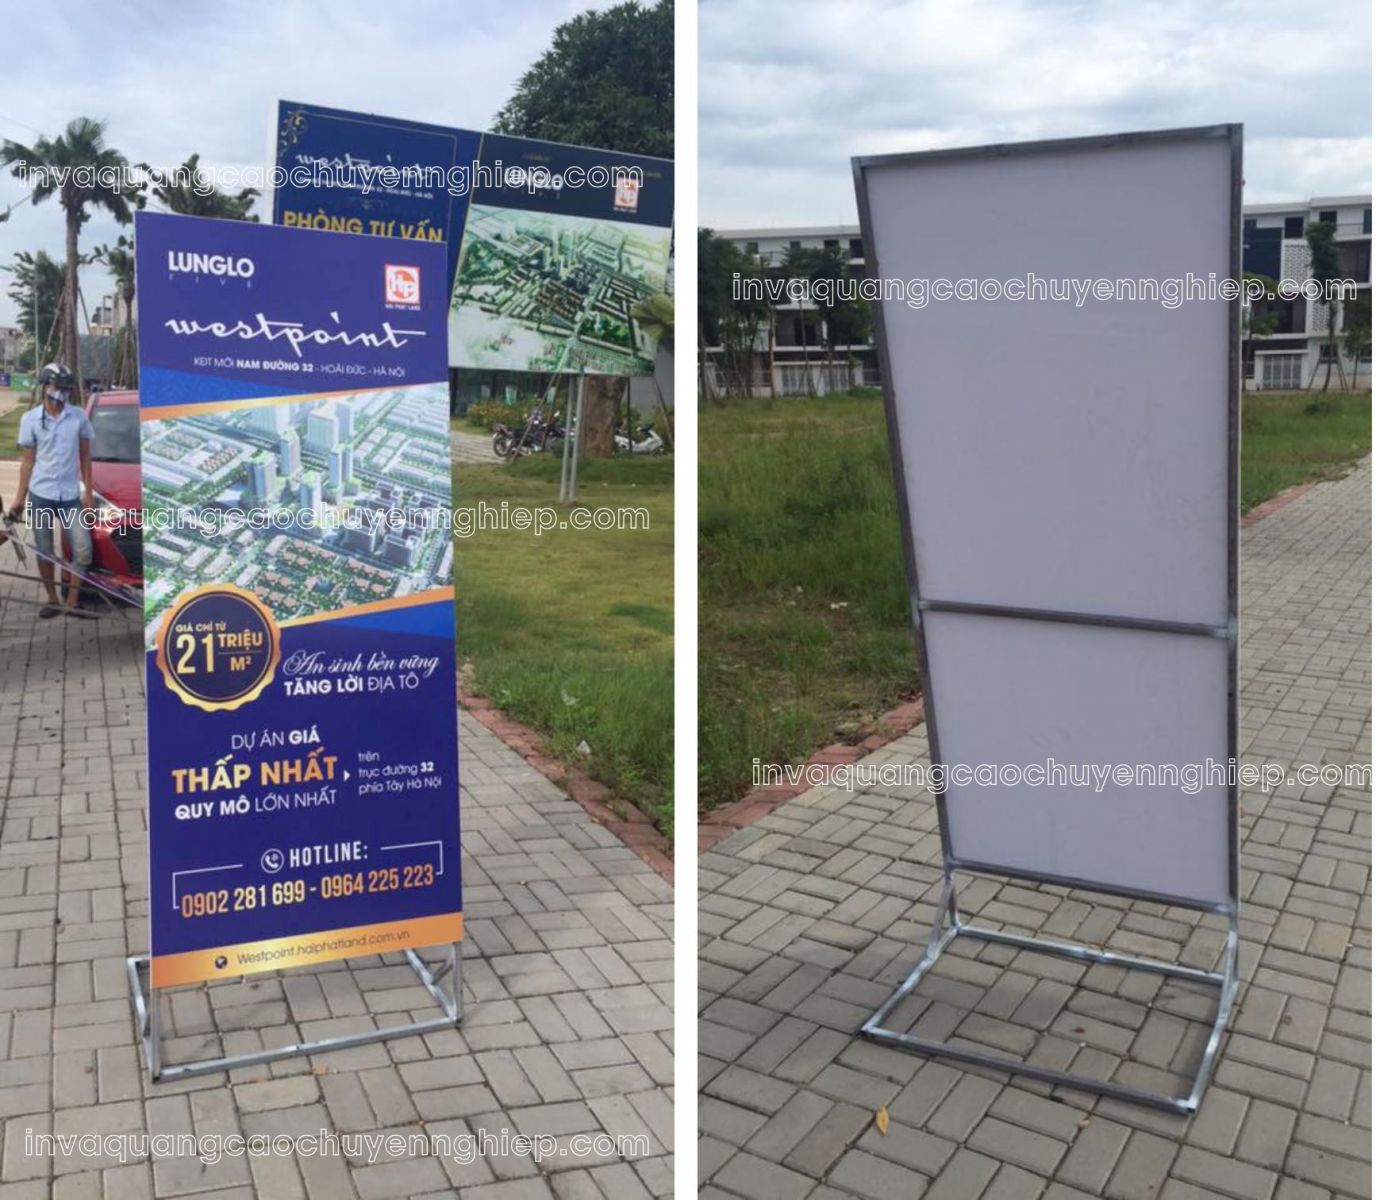 standee formex lunglo in decal pp bồi formex